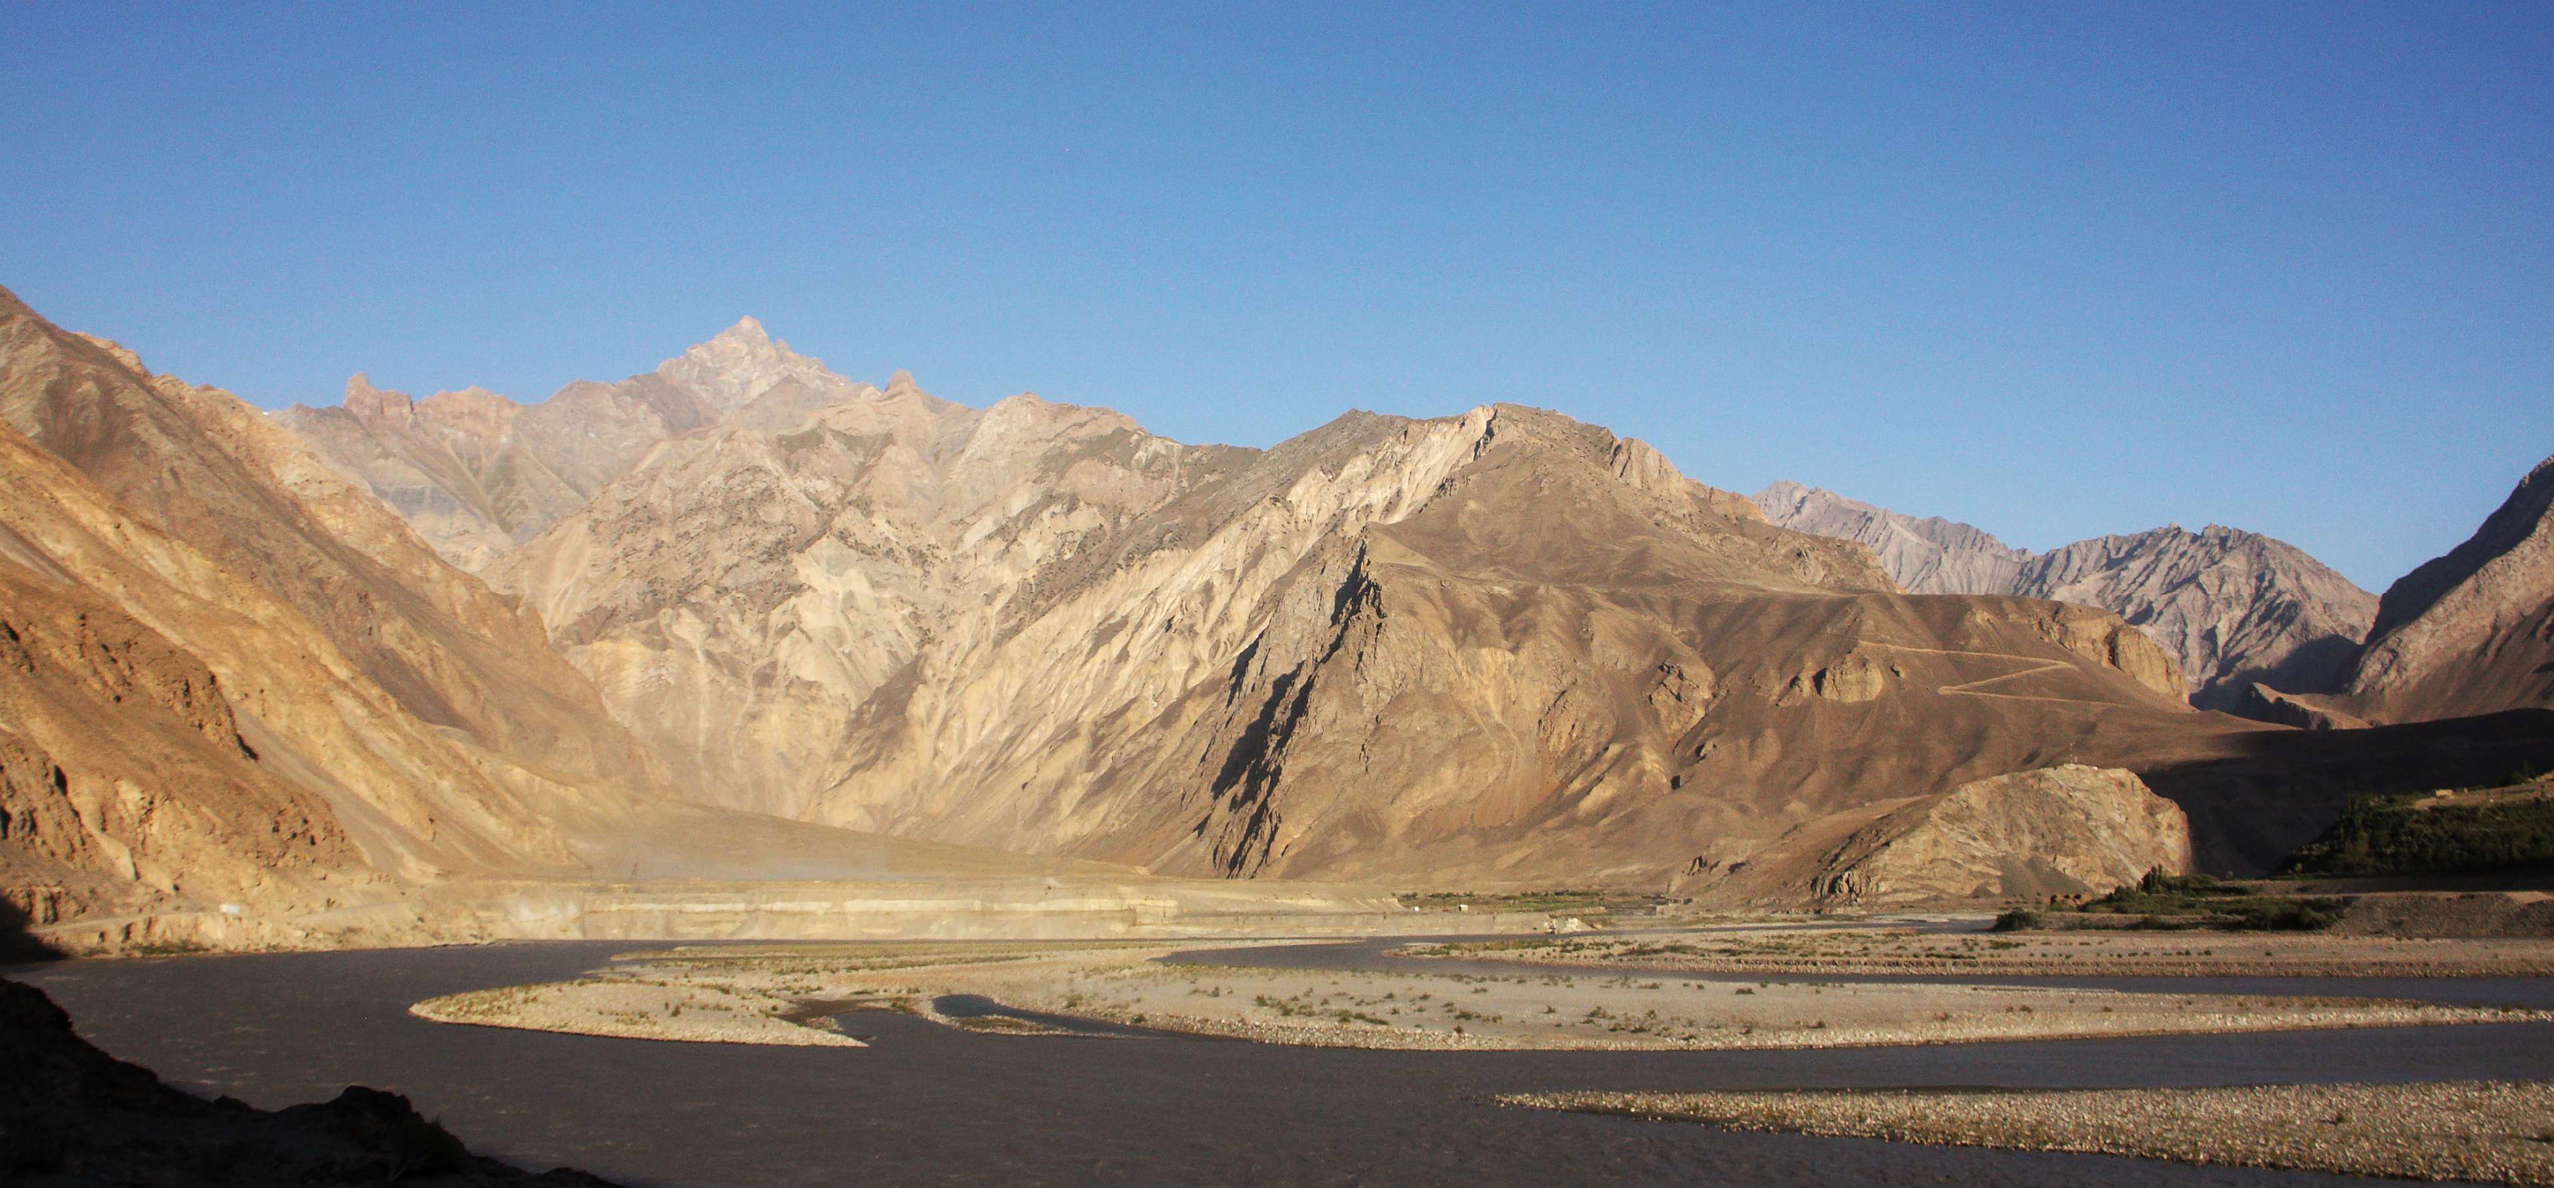 Panj Valley with Vanj river mouth